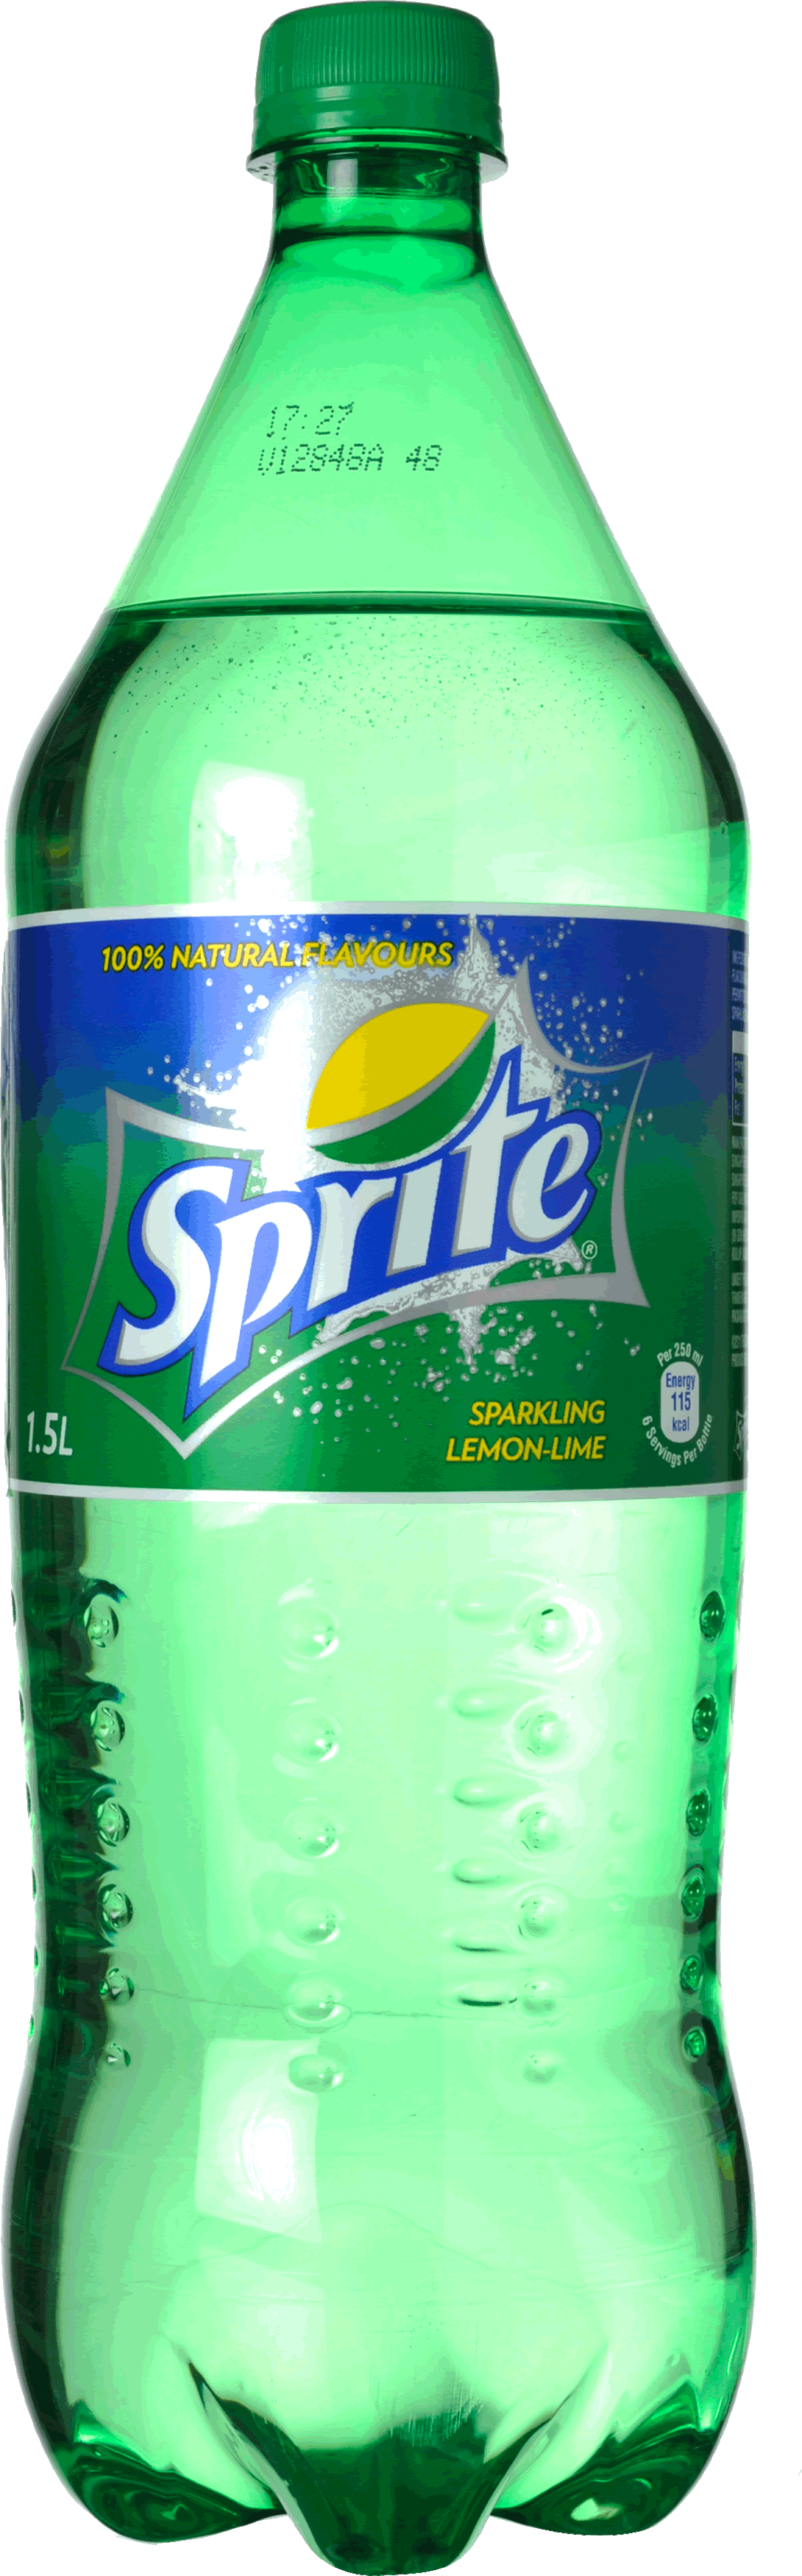 Sprite bottle png. Images can image